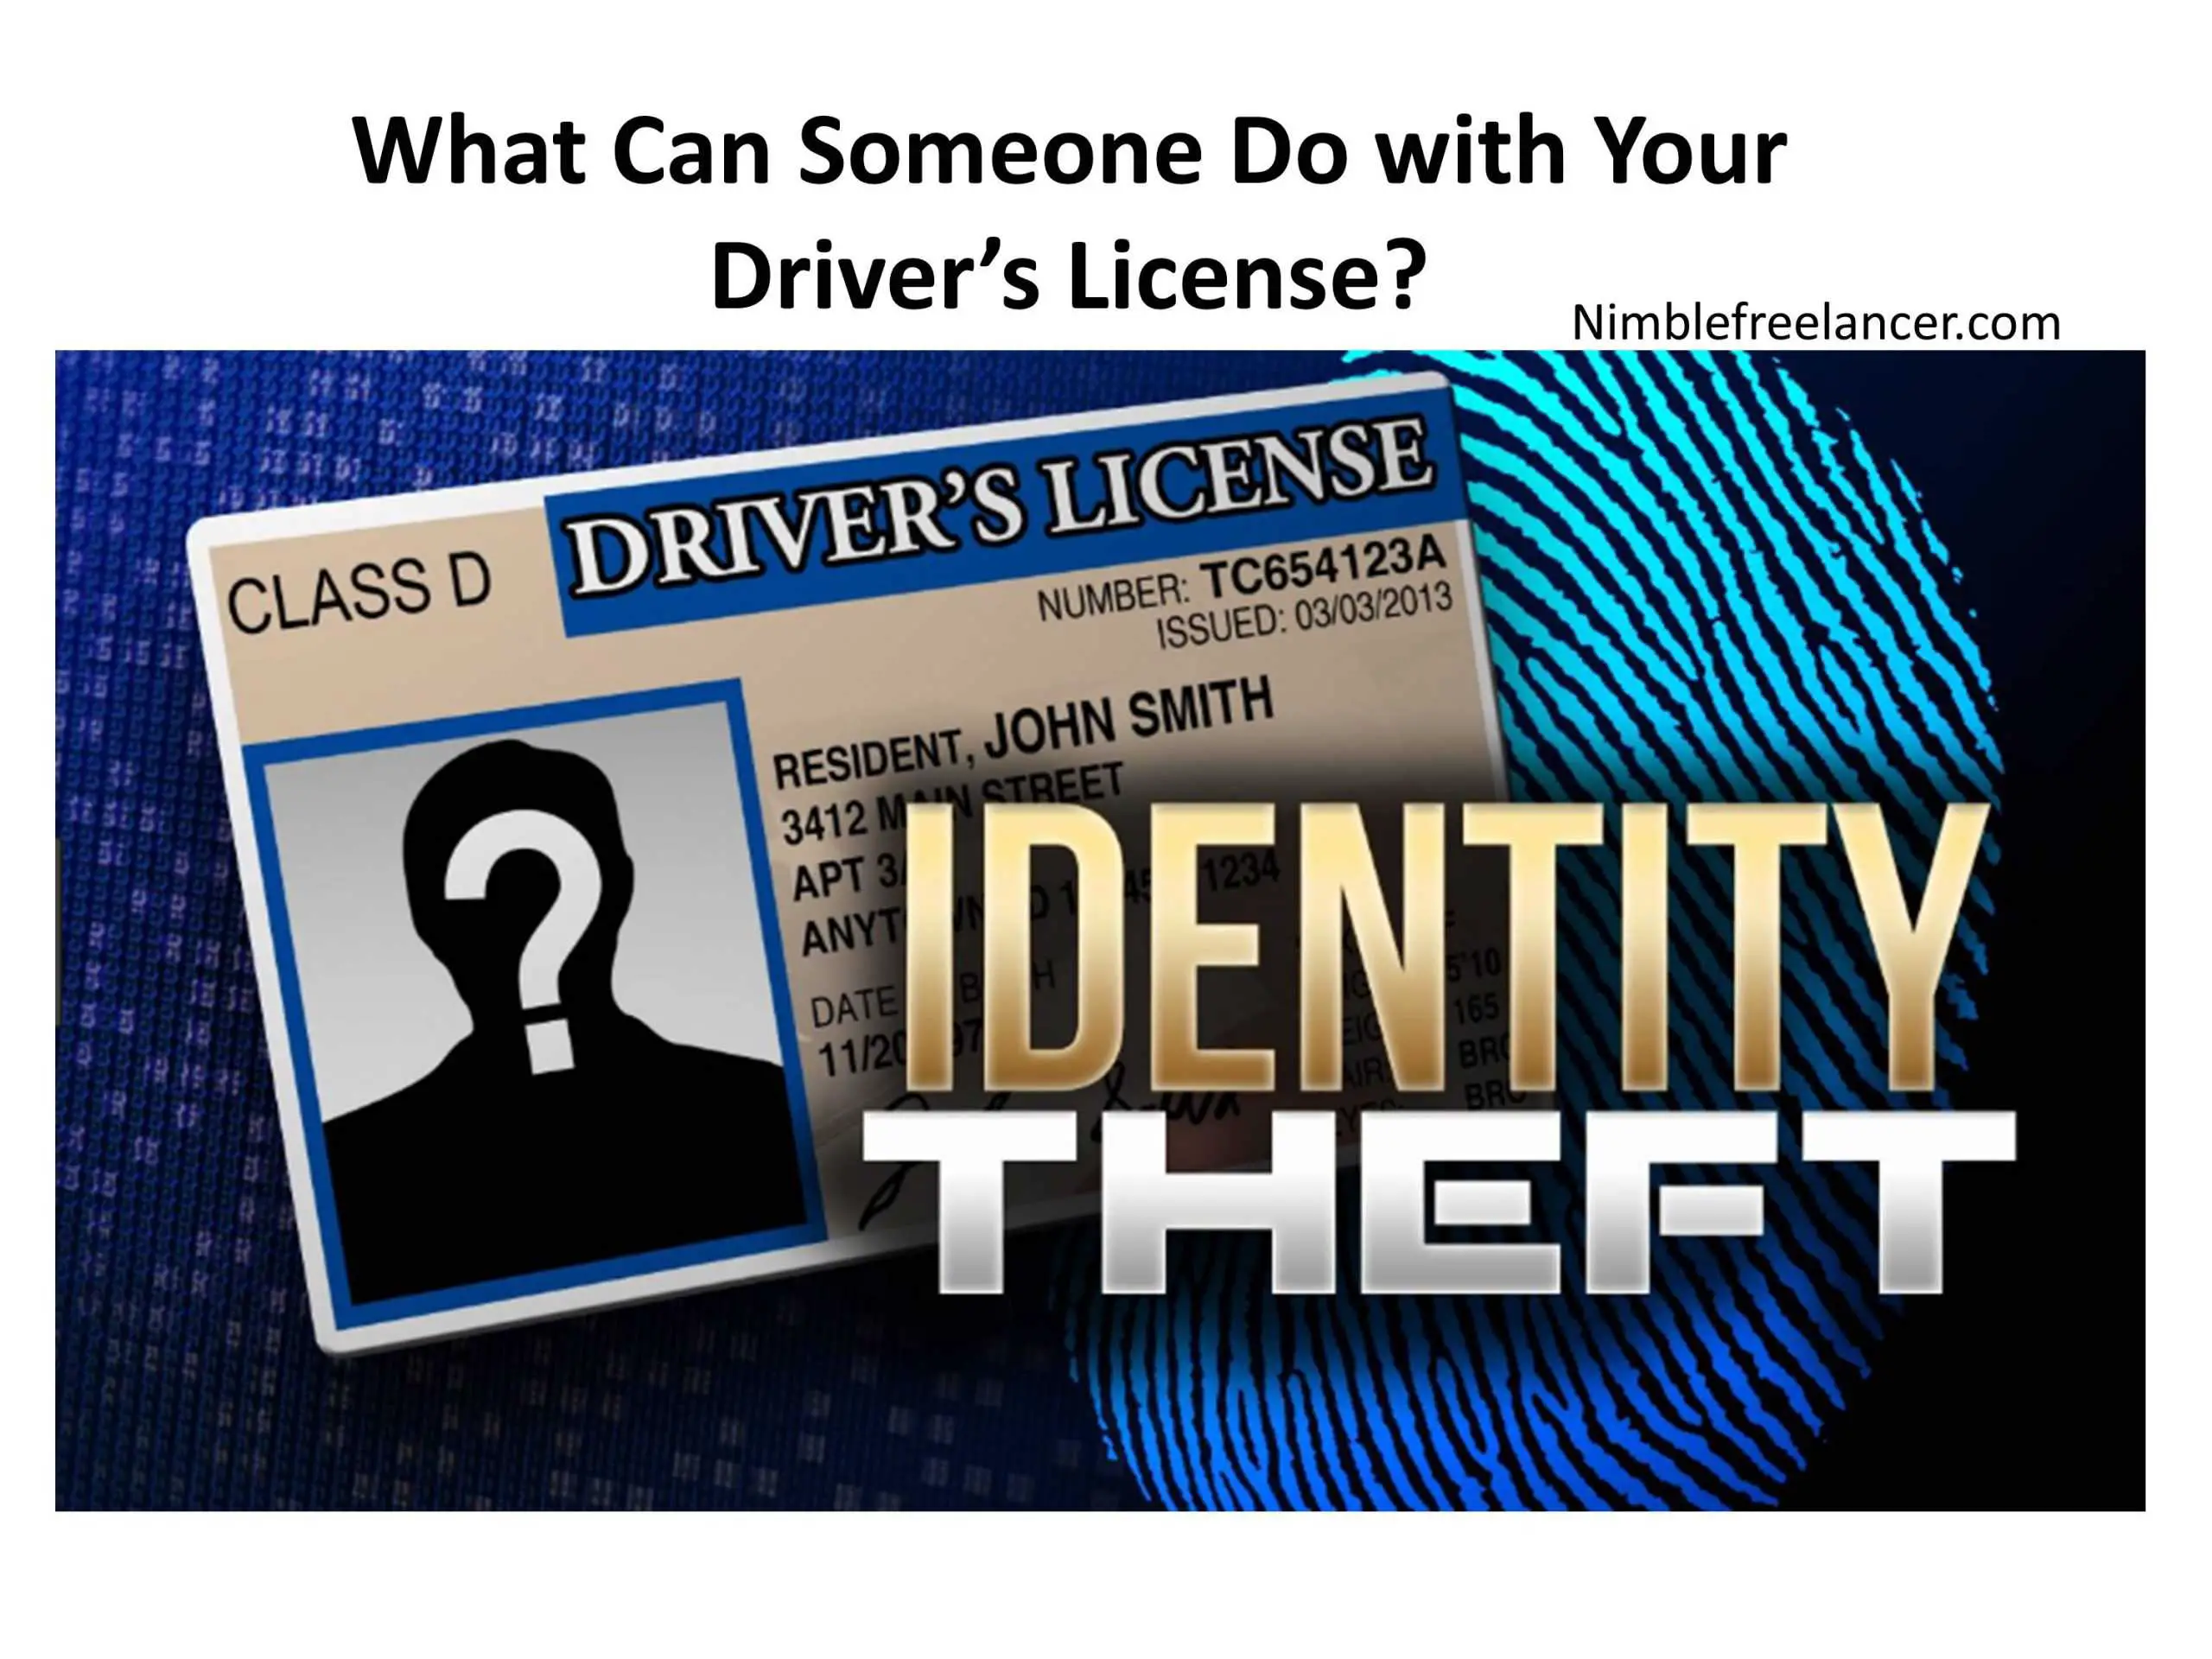 What Can Someone Do with Your Driver’s License?